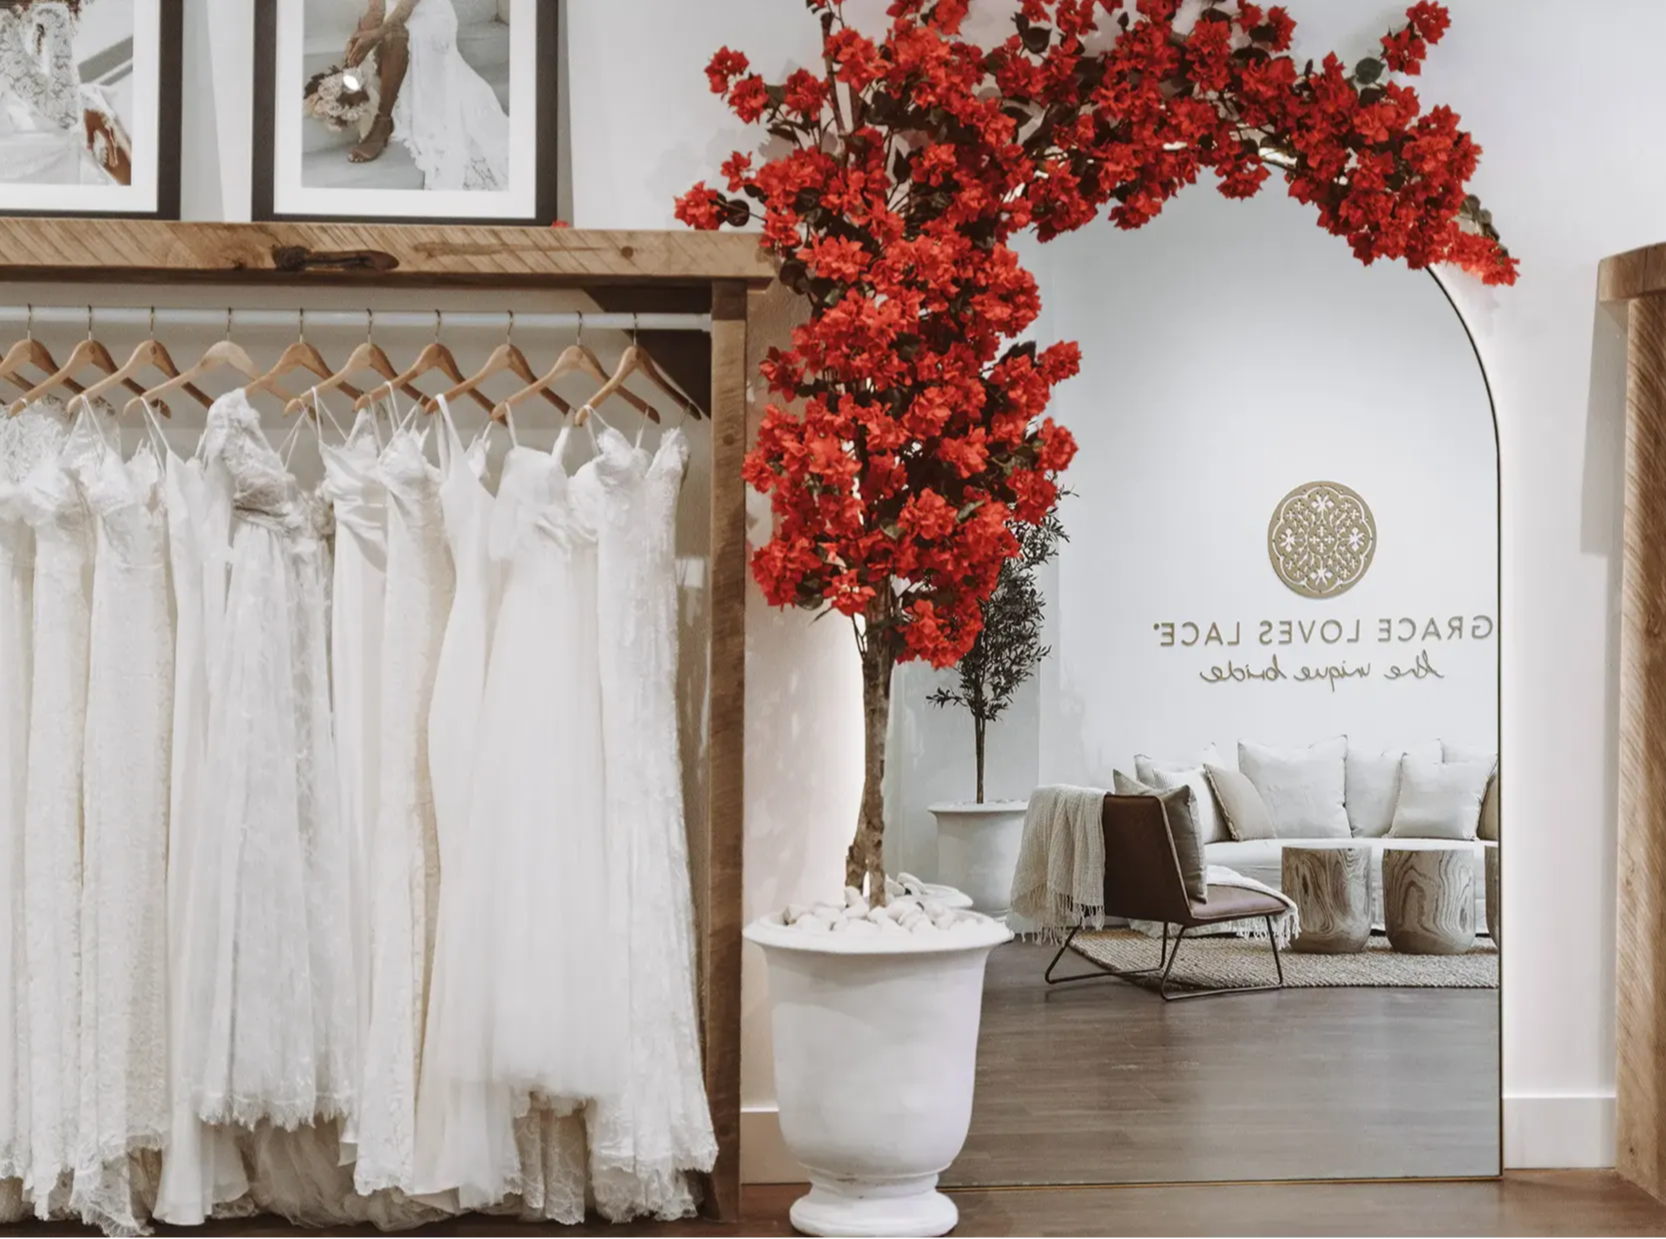 Red bougainvillea hanging over arch mirror in white pot in Grace Loves Lace bridal showroom